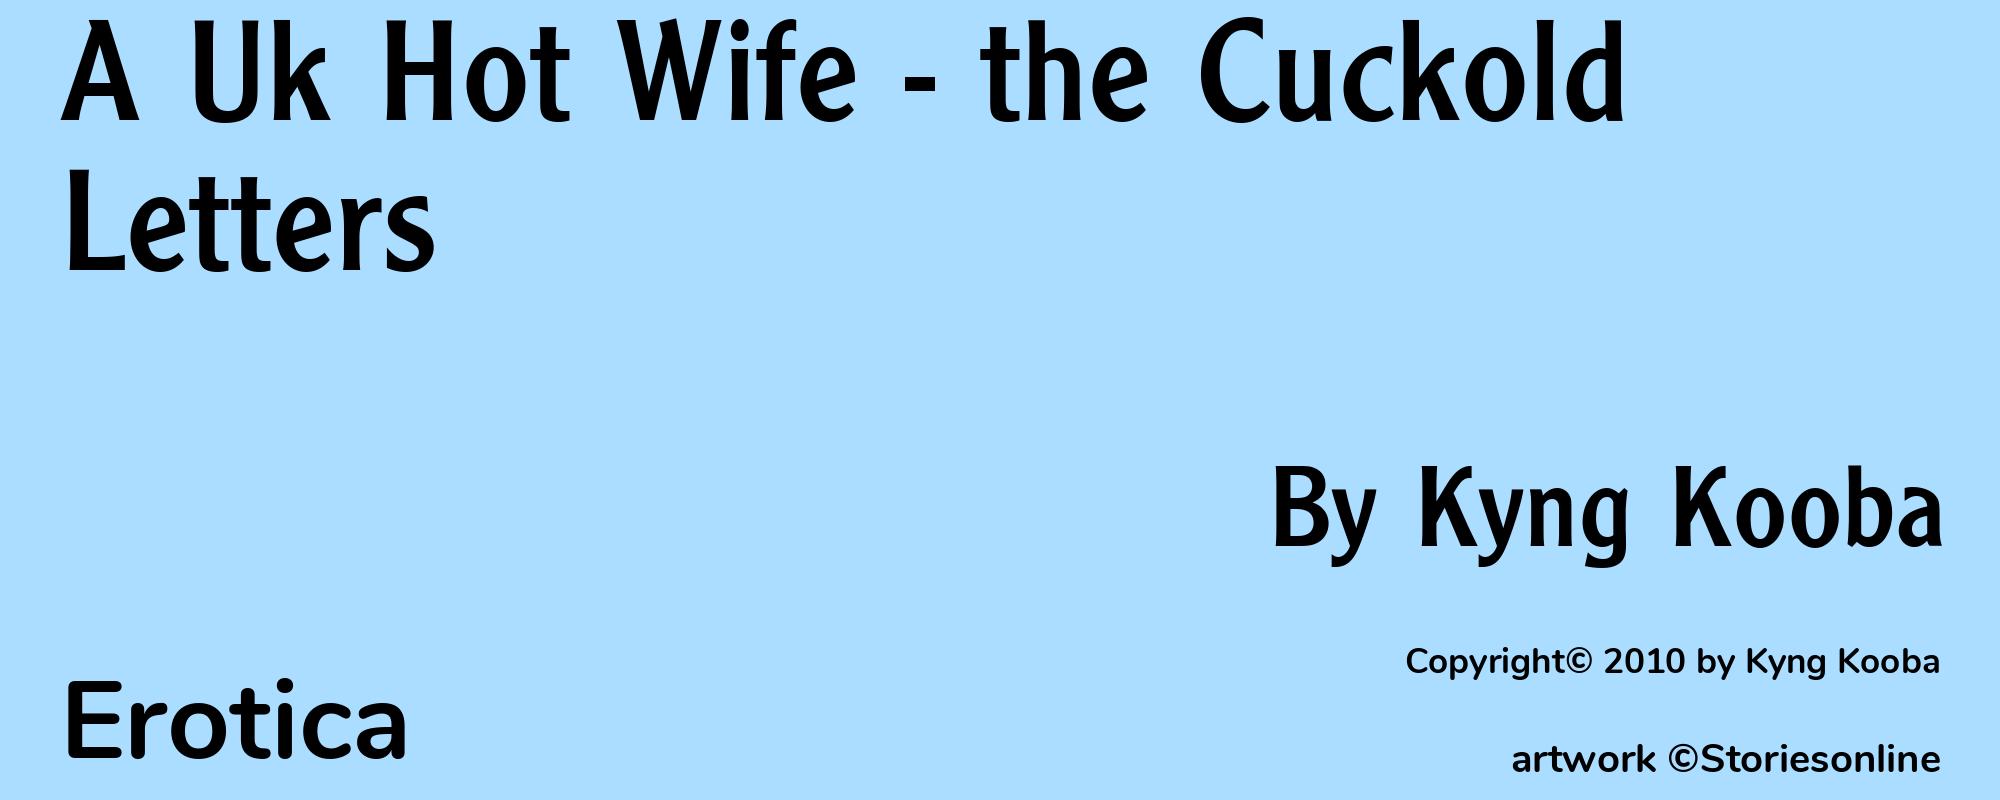 A Uk Hot Wife - the Cuckold Letters - Cover